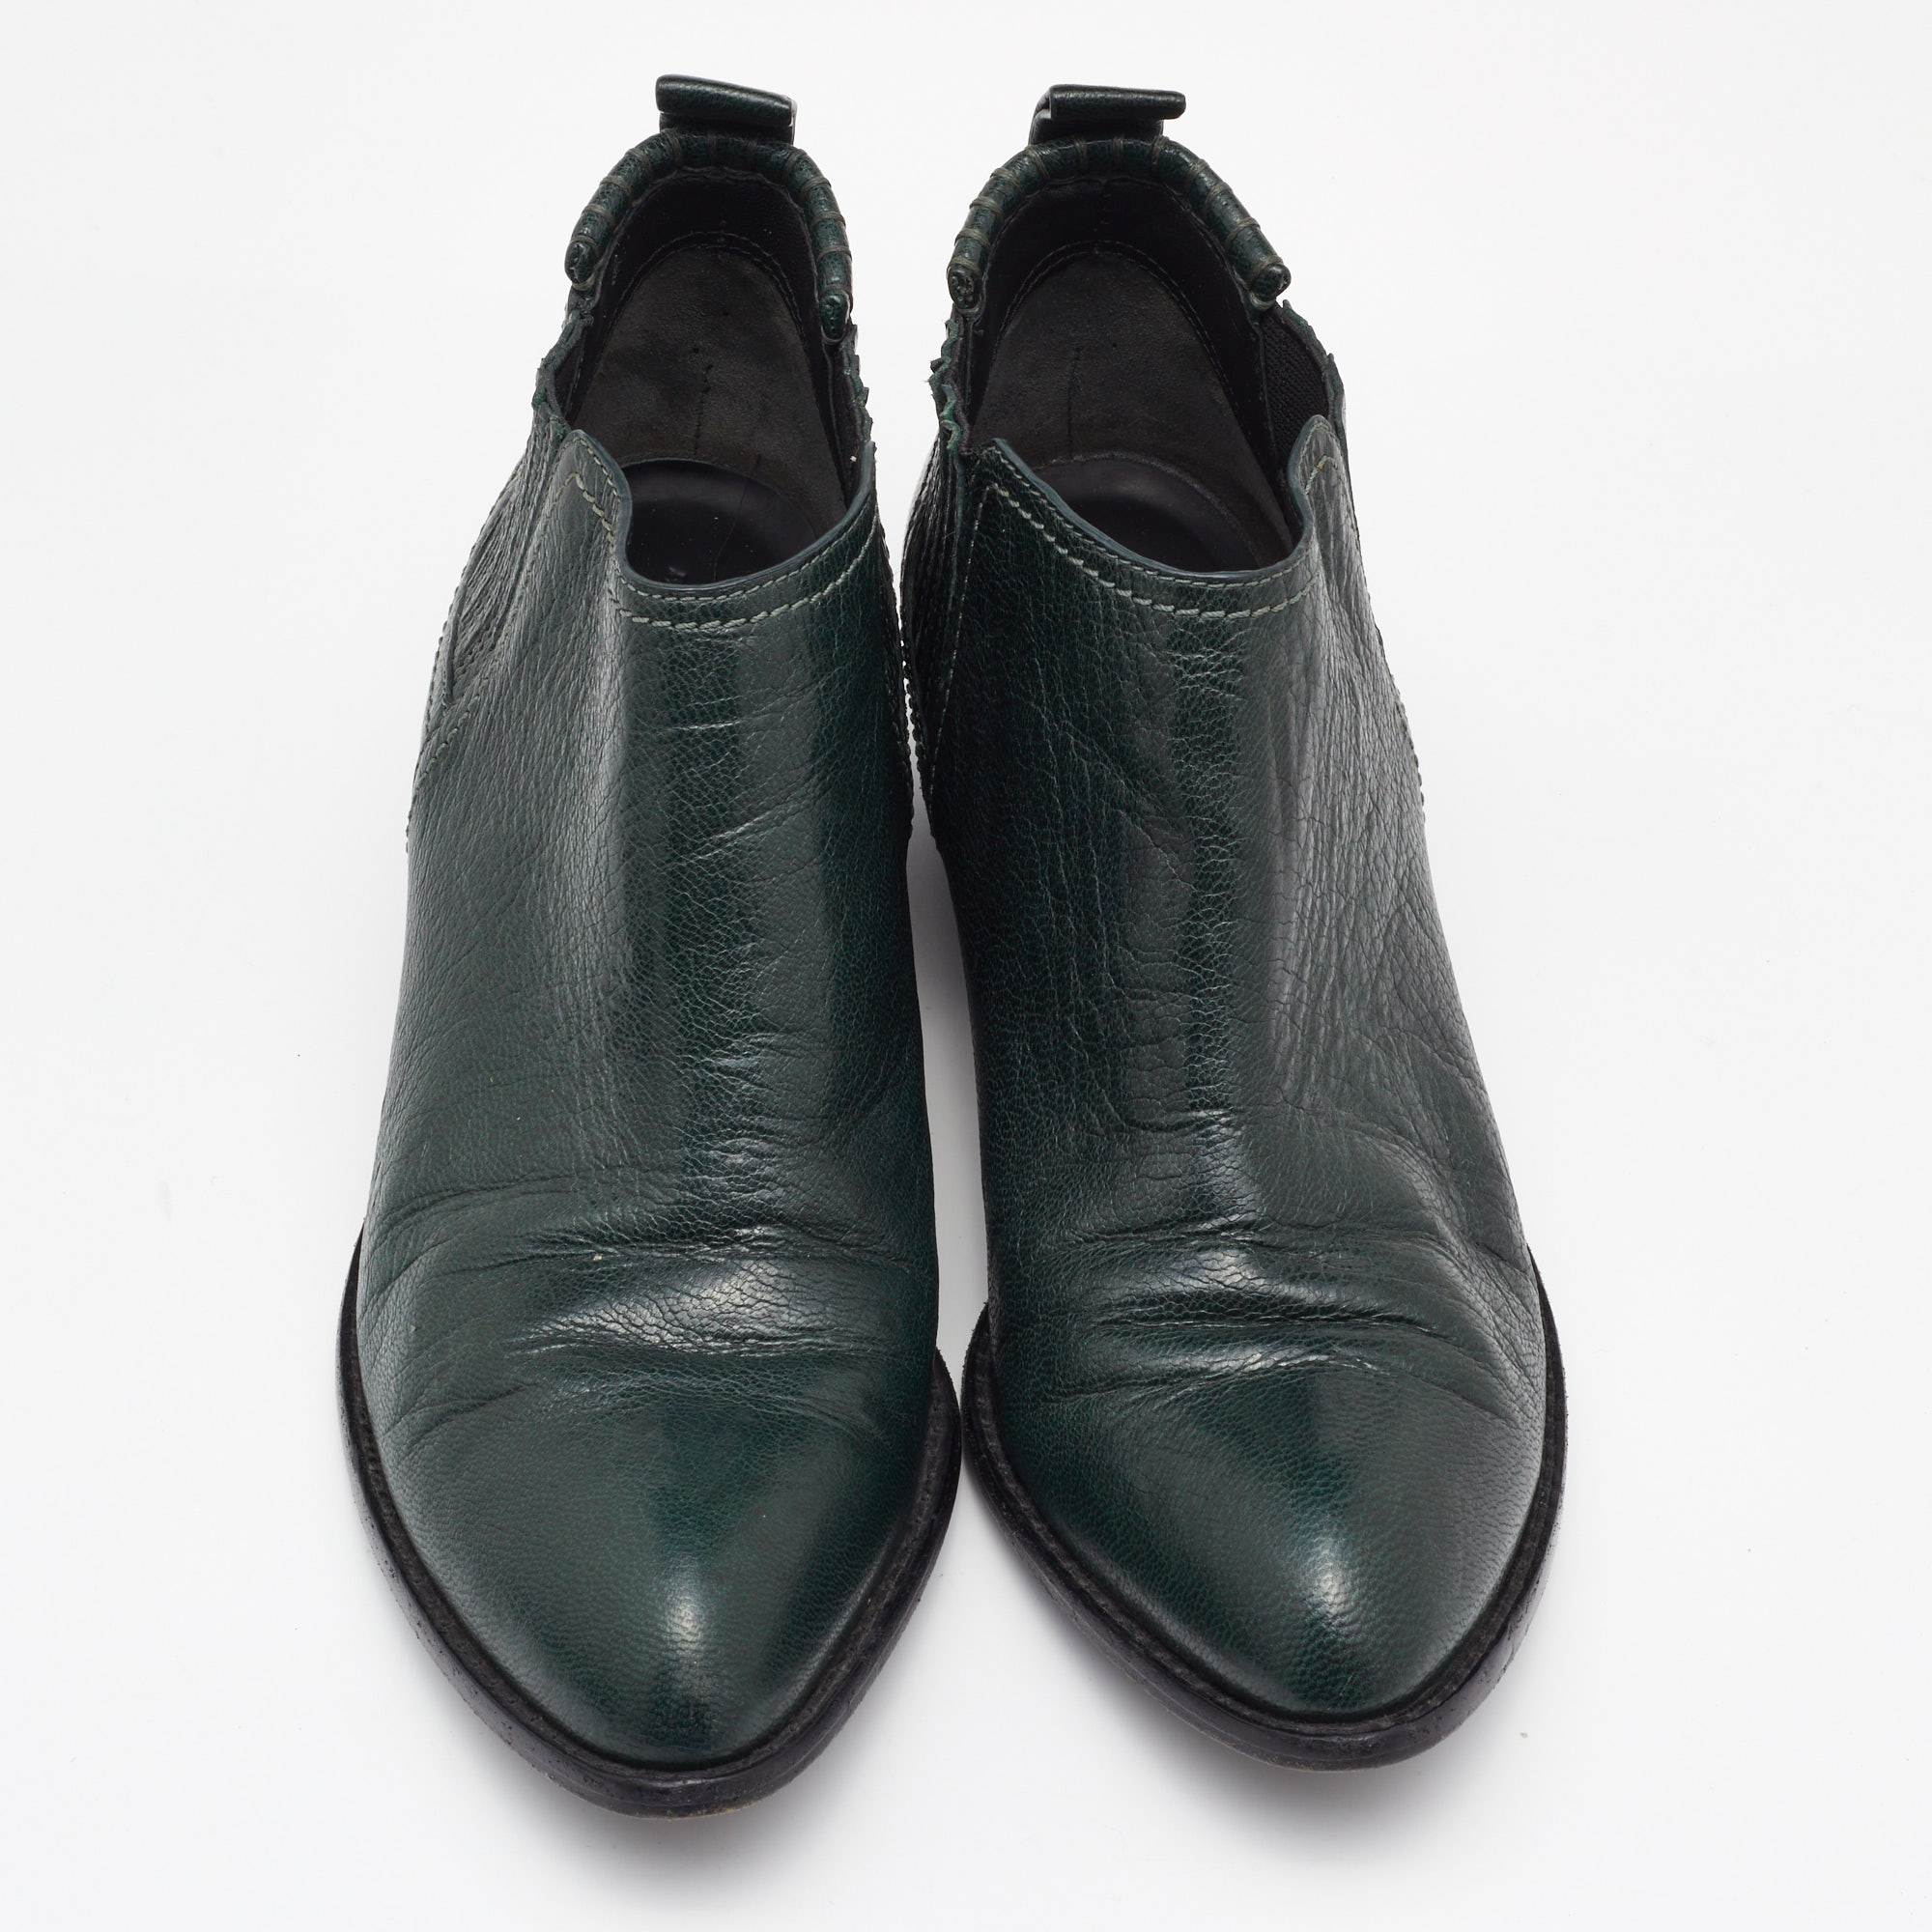 Alexander Wang Green Leather Cut Out Kori Ankle Boots Size 38